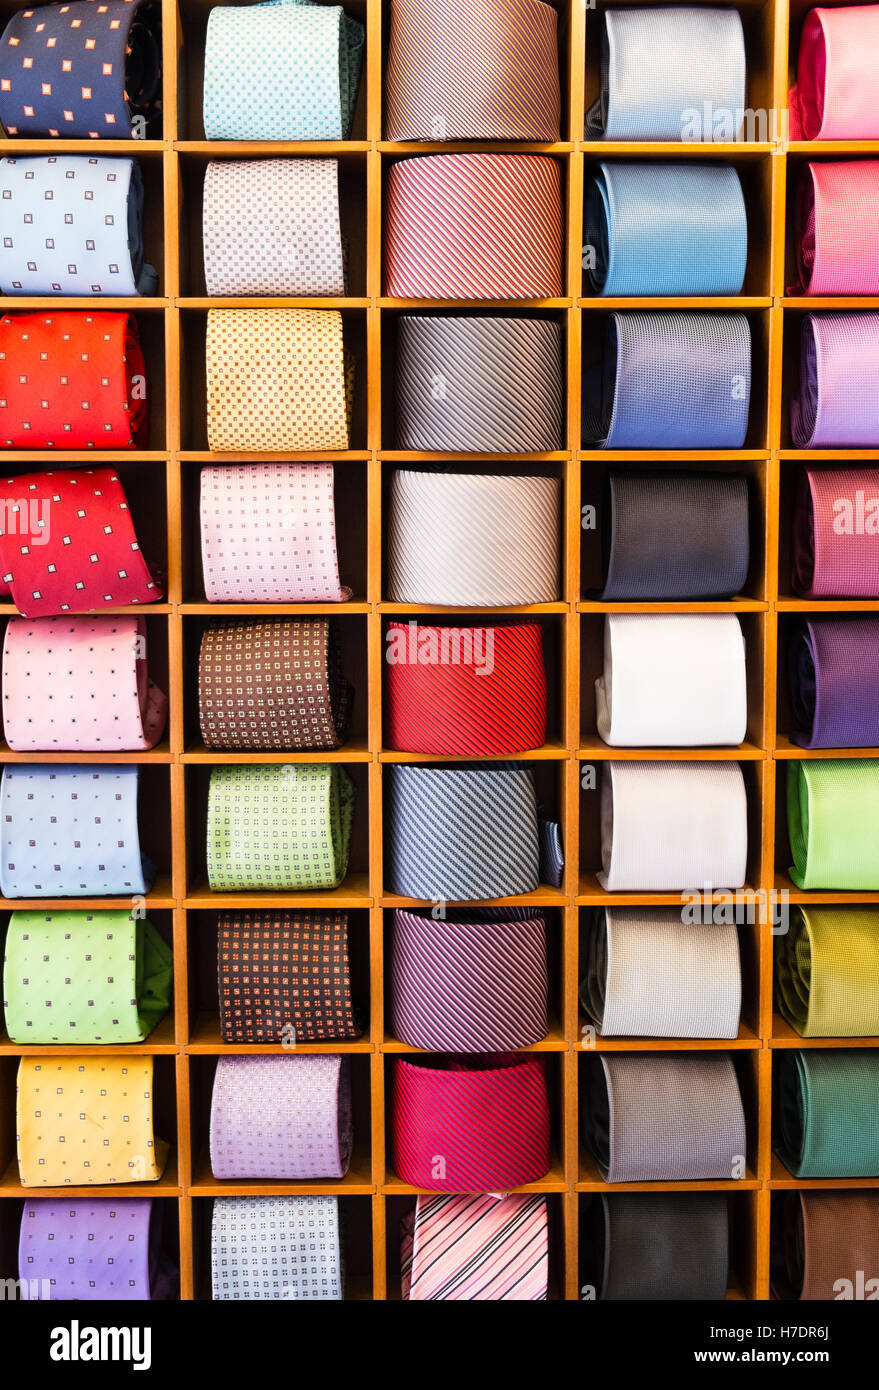 A retail display of mens neckties showing varied colors, patterns and fabrics. Stock Photo